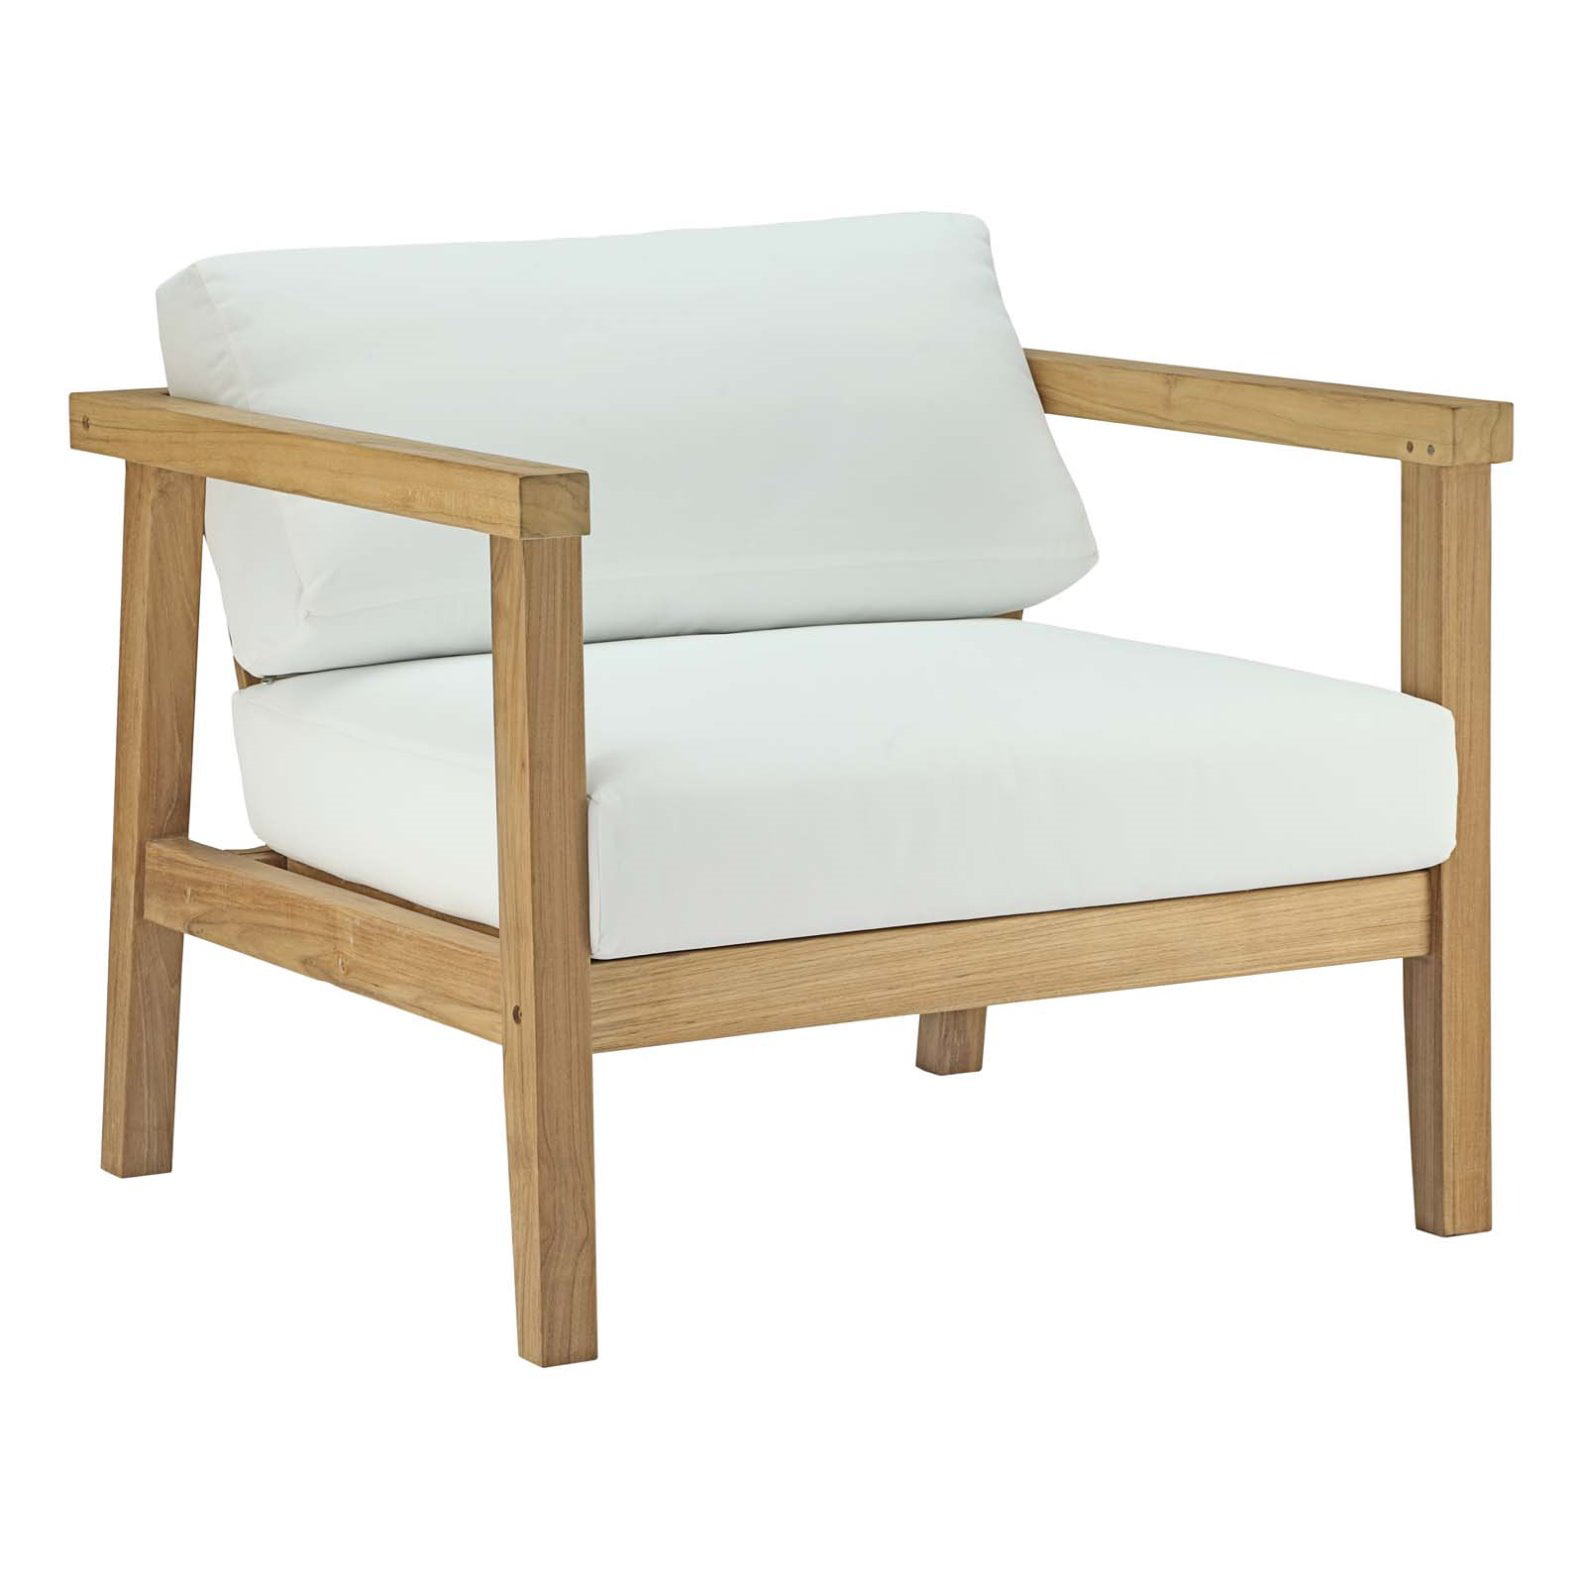 Modern Contemporary Urban Design Outdoor Patio Balcony Lounge Chair, White, Wood